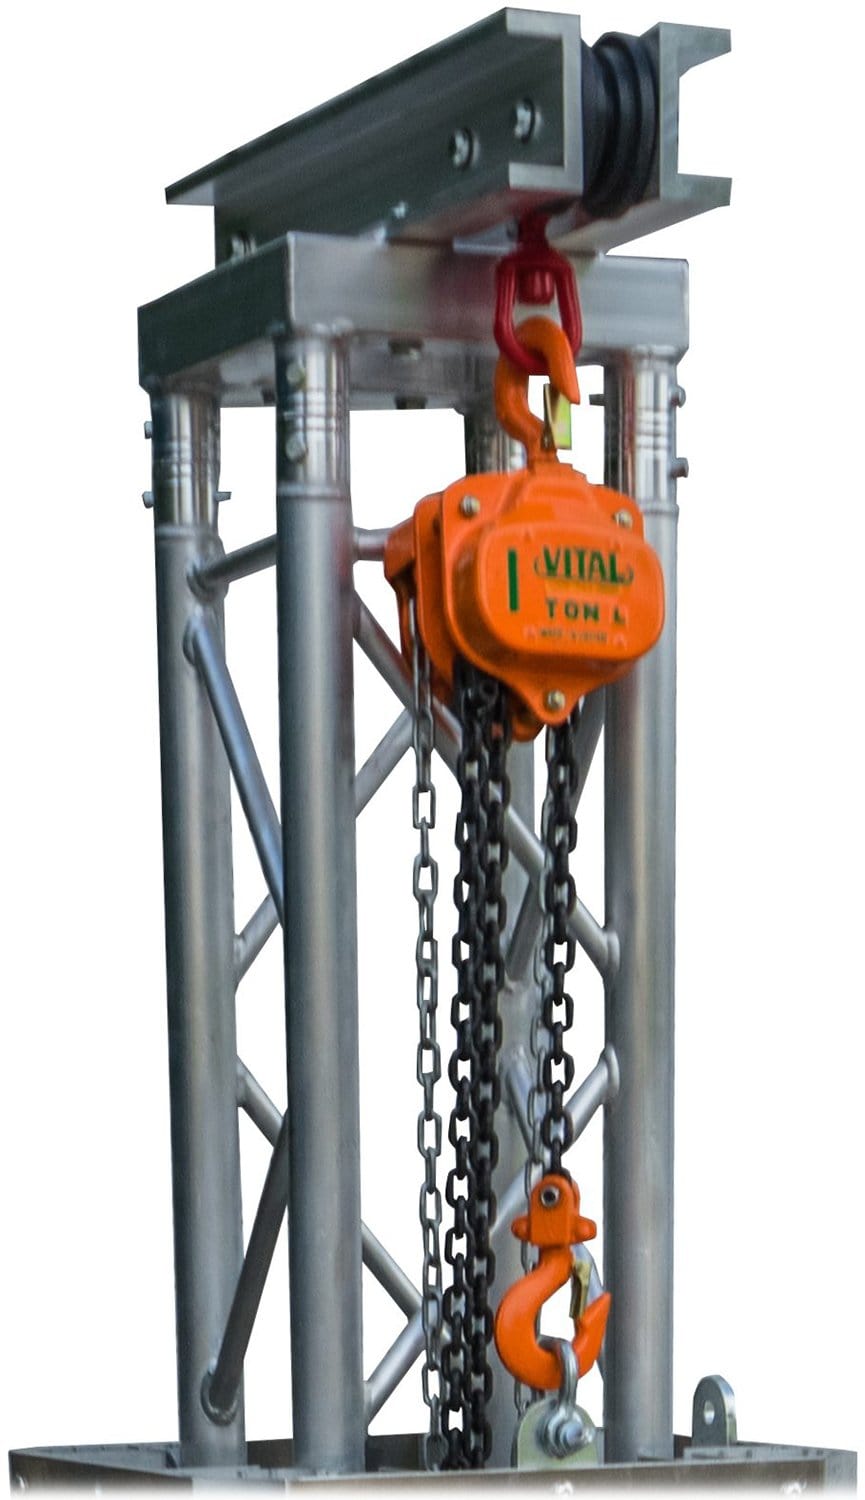 JMAZ 20Ft (6 Meter) Manual Chain Hoist rated 1 Ton - ProSound and Stage Lighting